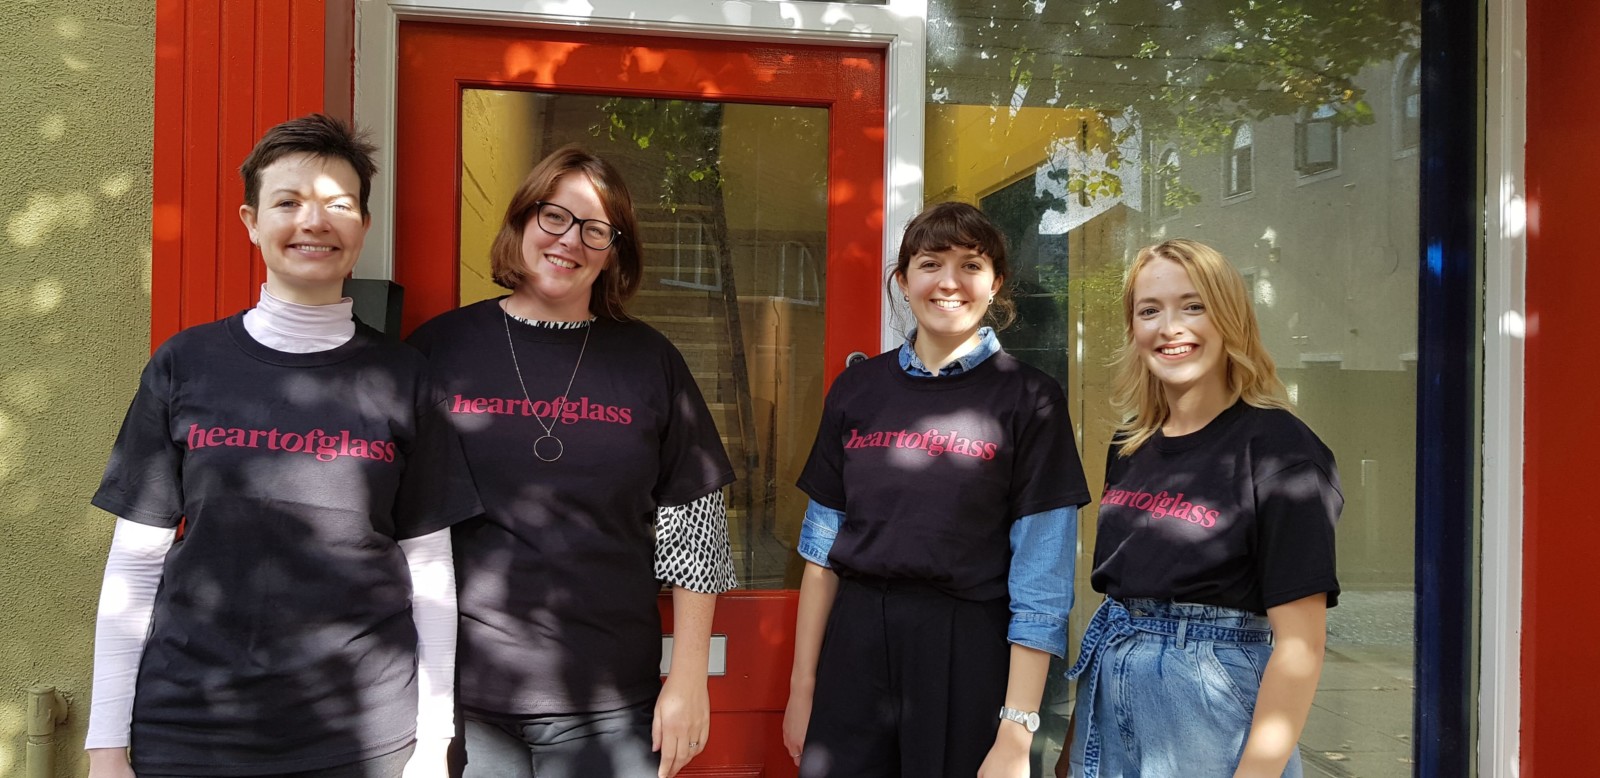 Four women stand in front of a building with a red door and woodwork and a large window. They are all wearing black tshirts with the red Heart of Glass logo printed on to them. This new logo is the words heart of glass across one horizontal line without spaces.